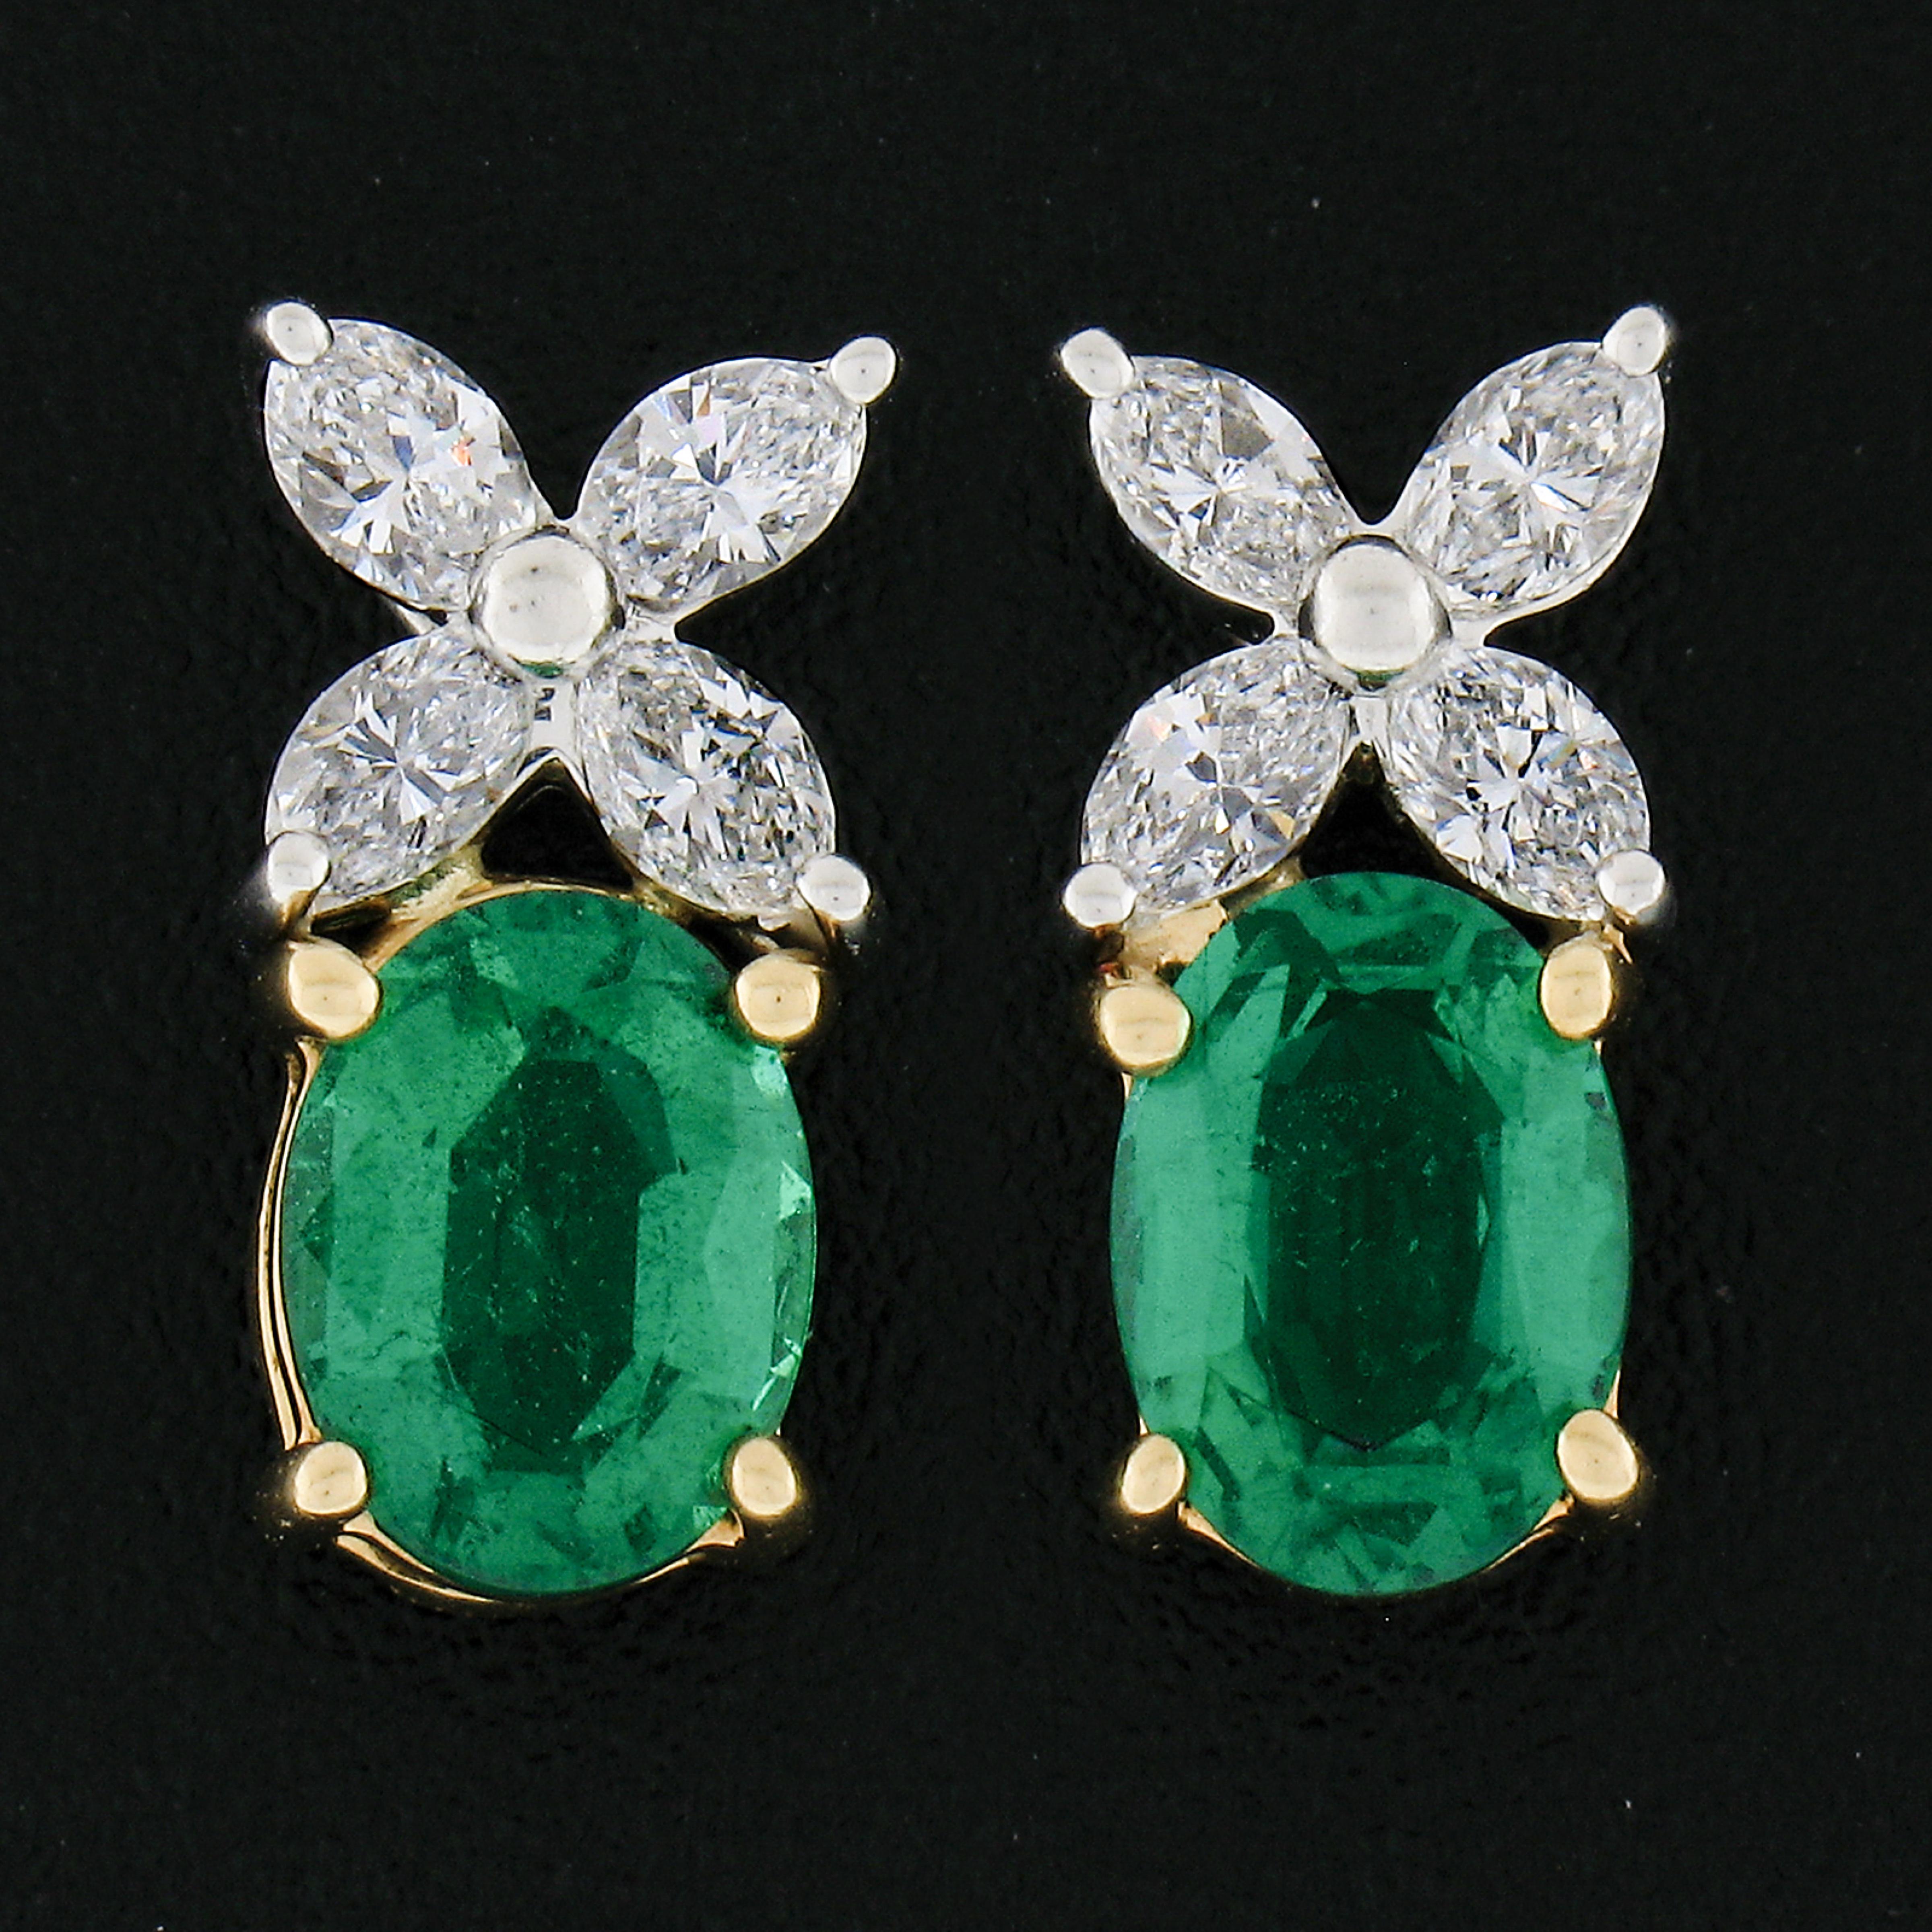 These fancy, Tiffany & Co., emerald and diamond drop earrings are crafted in solid platinum and 18k yellow gold and feature very well made prong settings that each elegantly embraces the gorgeous stones throughout. The beautiful, marquise cut